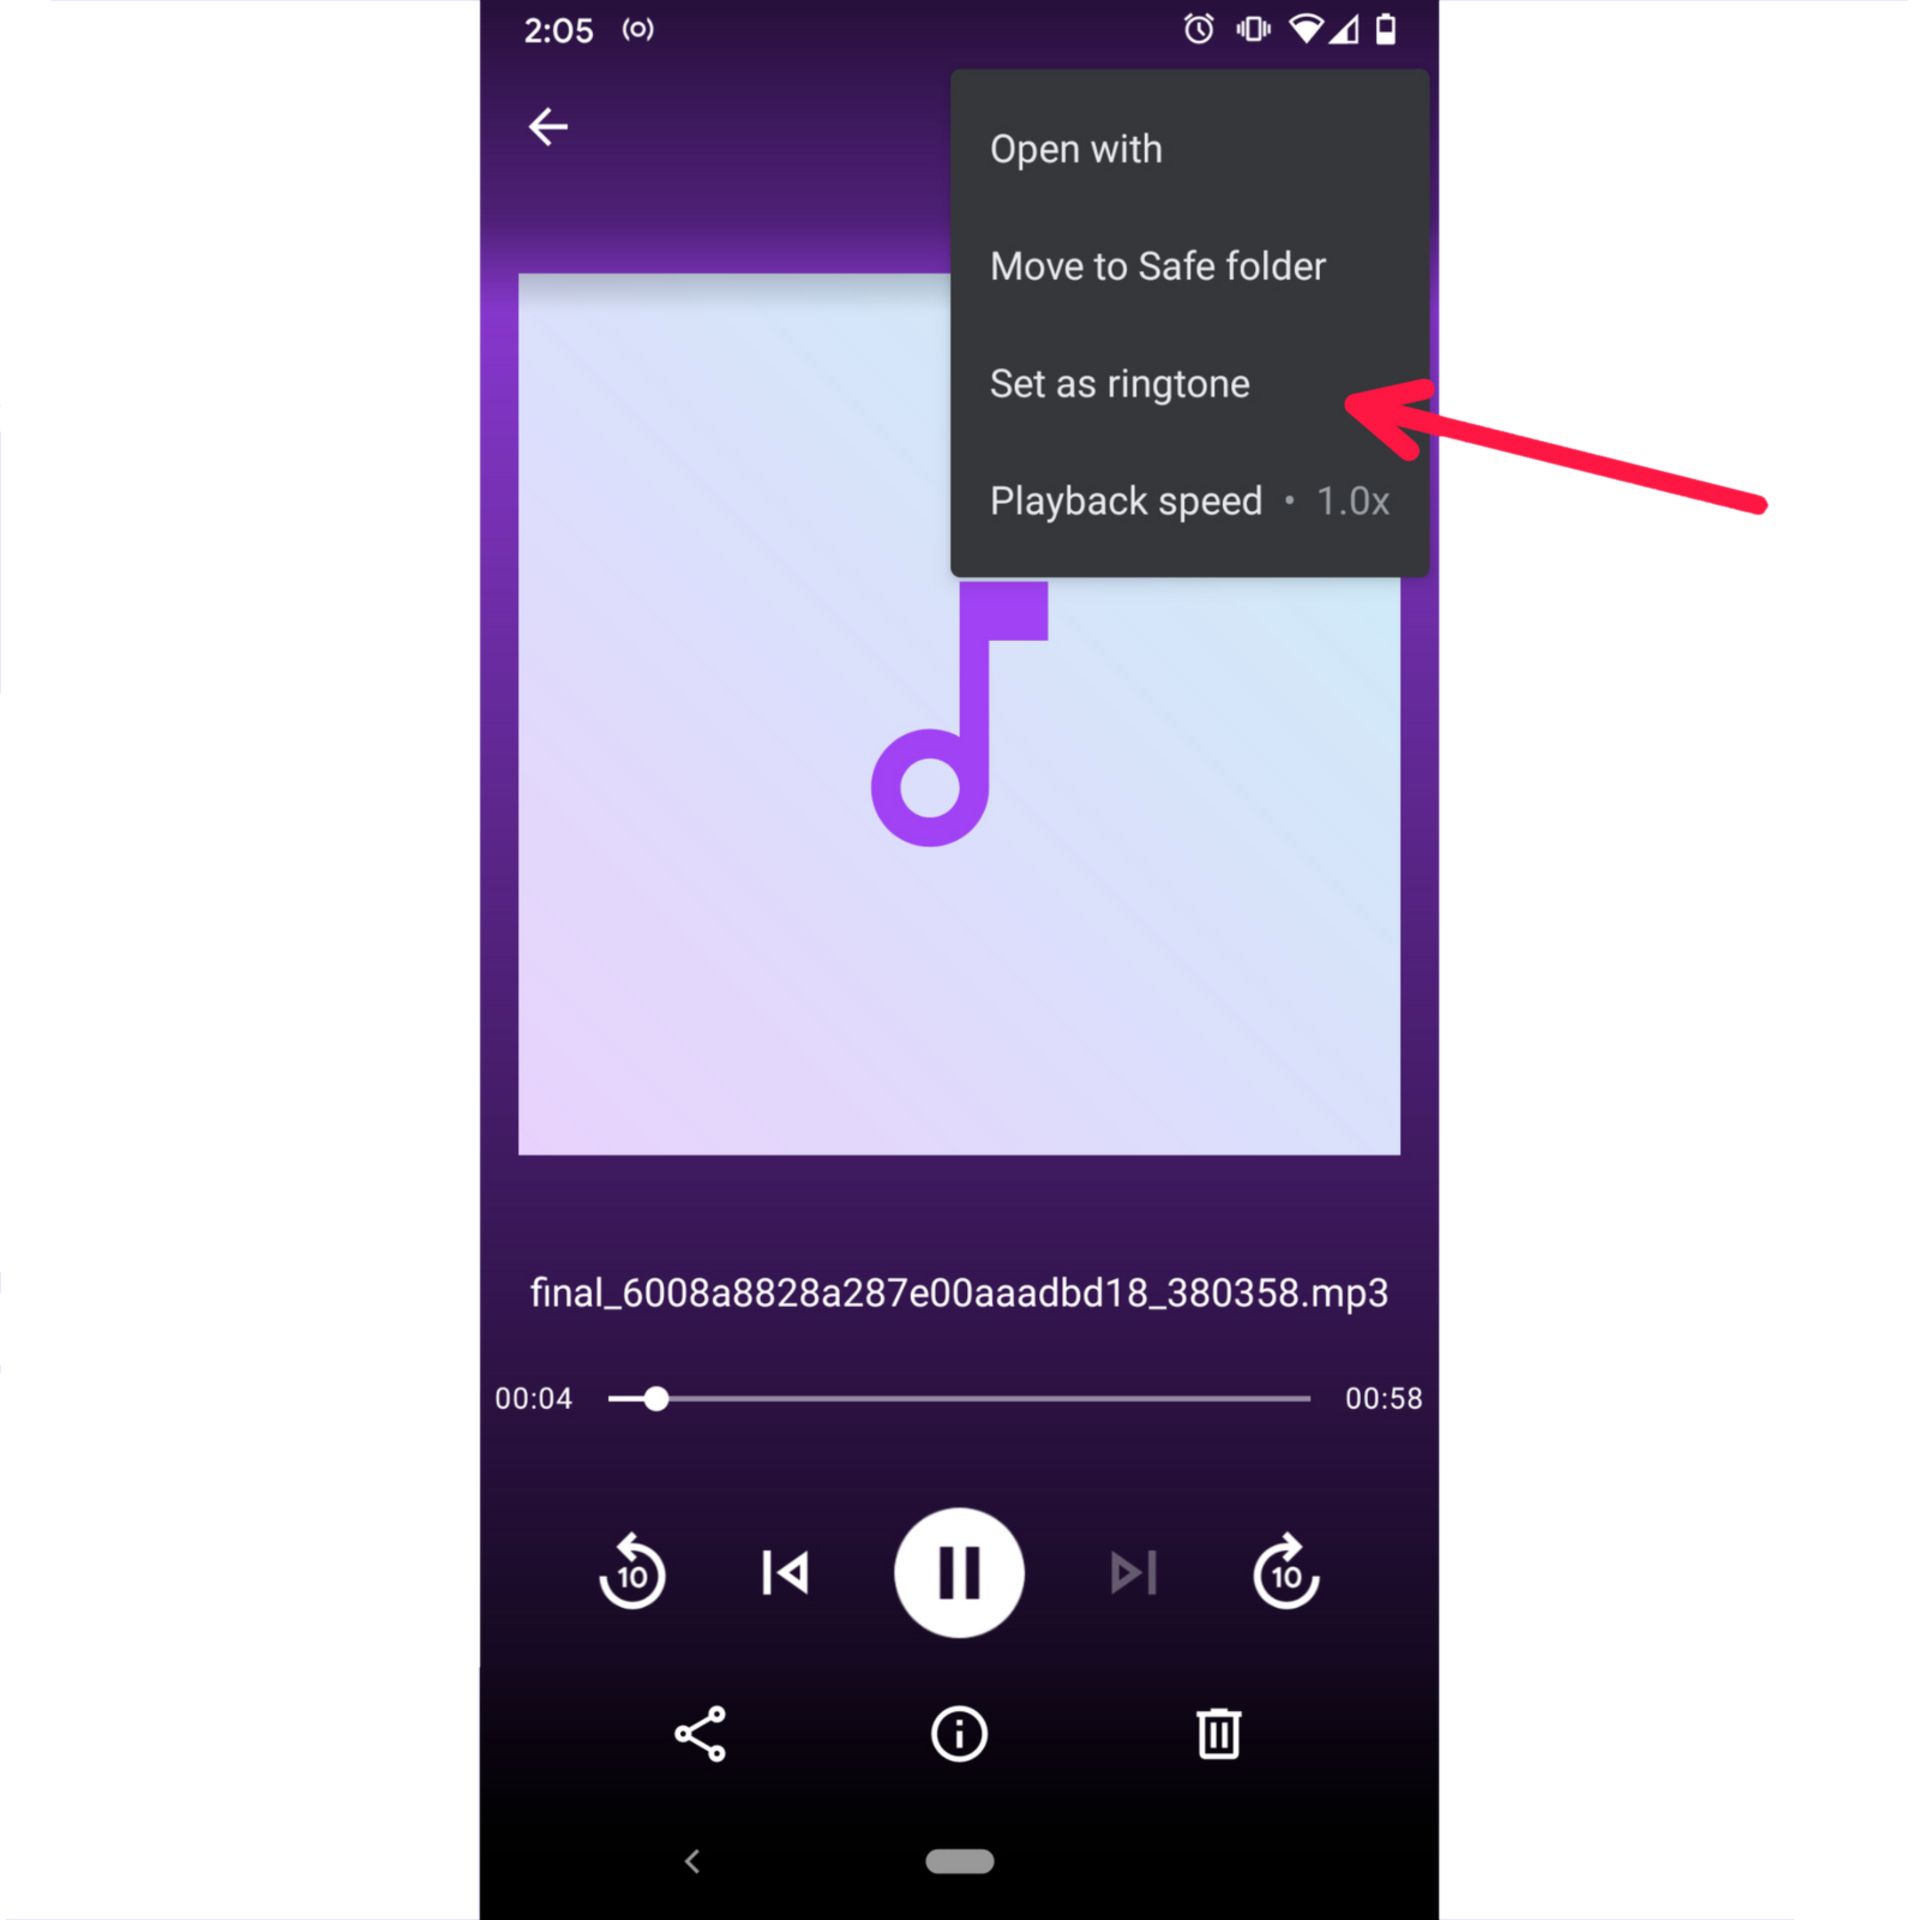 How to change the ringtone on my Android phone - Quora